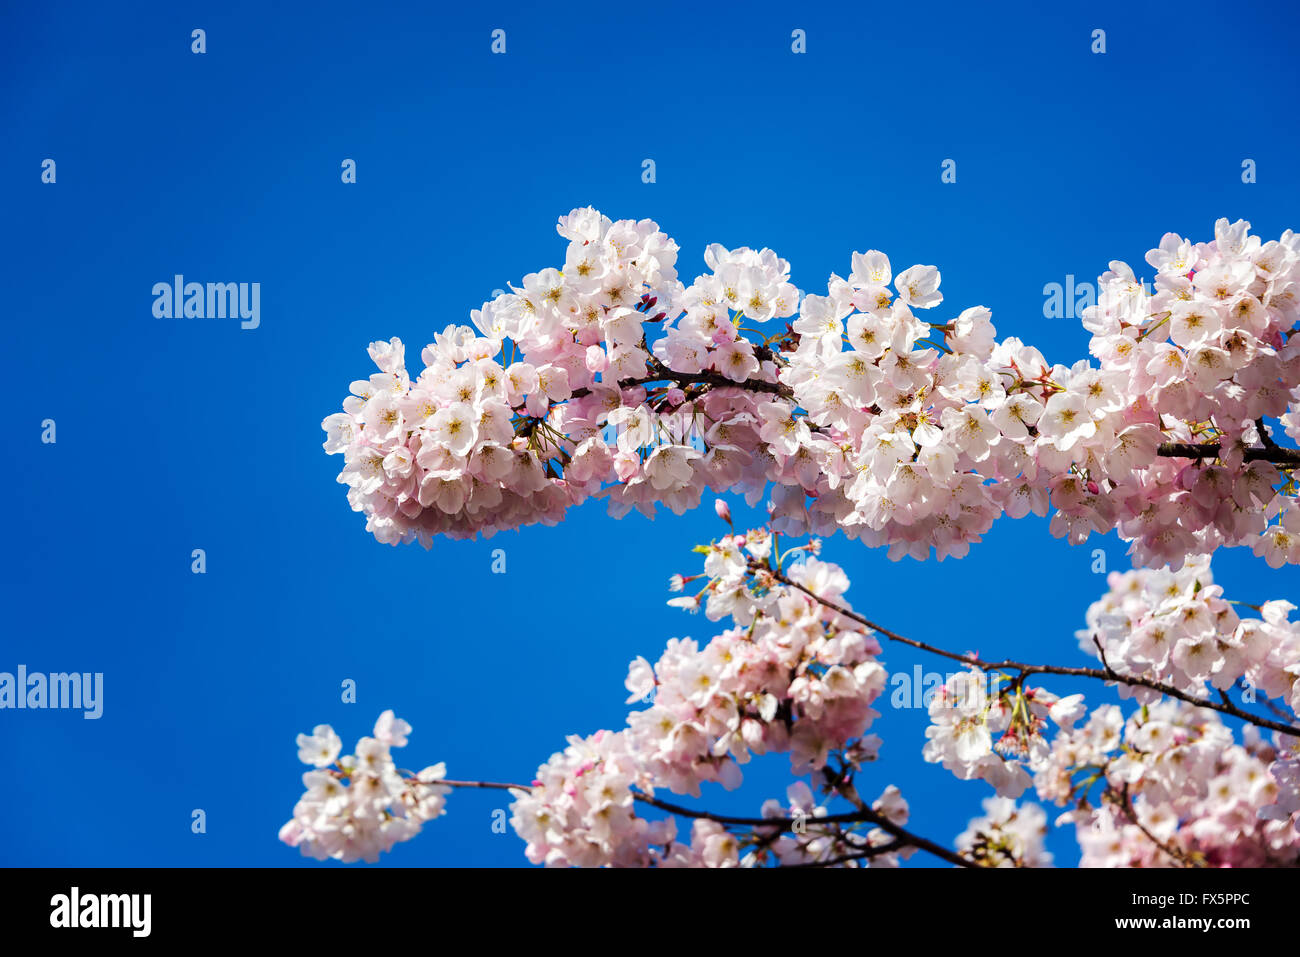 Closeup view of cherry blossom flowers in Portland, Oregon Stock Photo